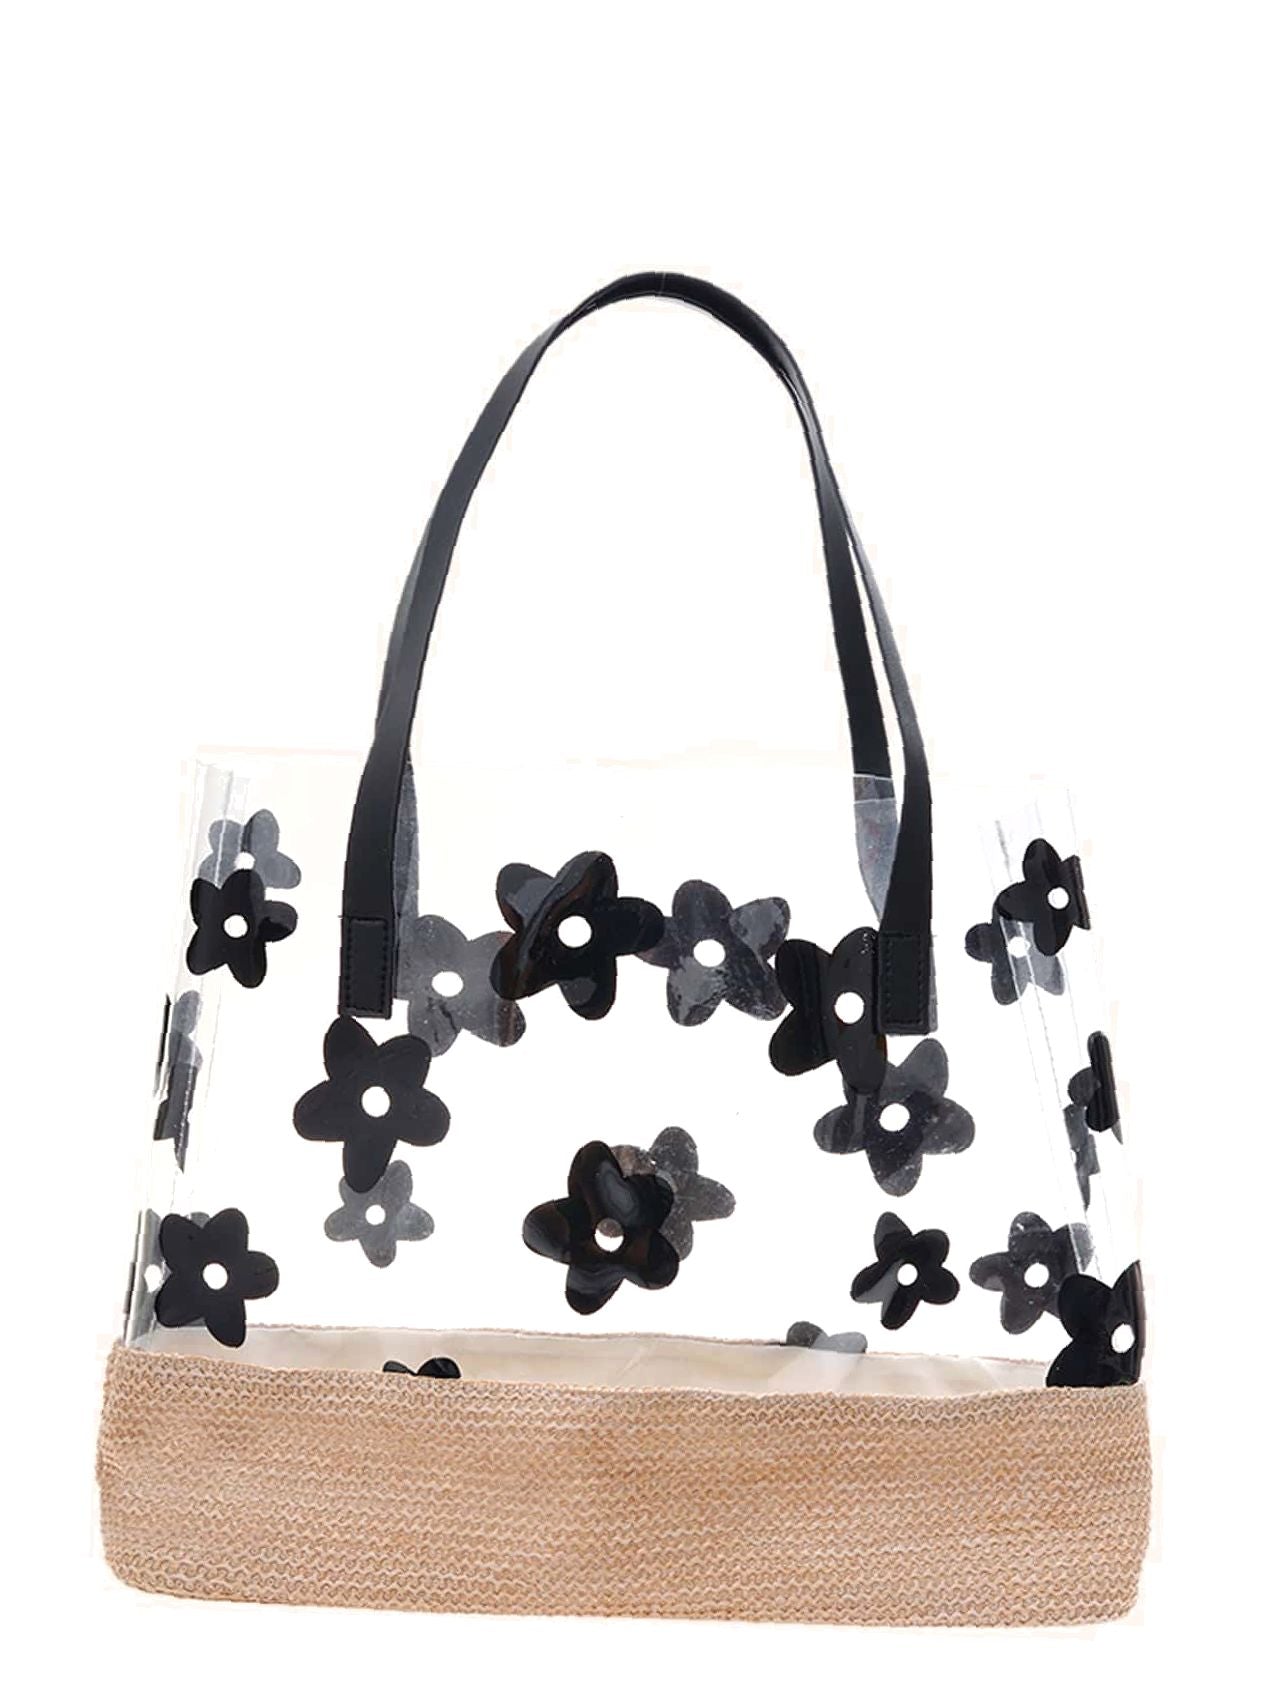 Olivia Mark - Clear Floral Graphic Tote Bag  - Women Tote Bags